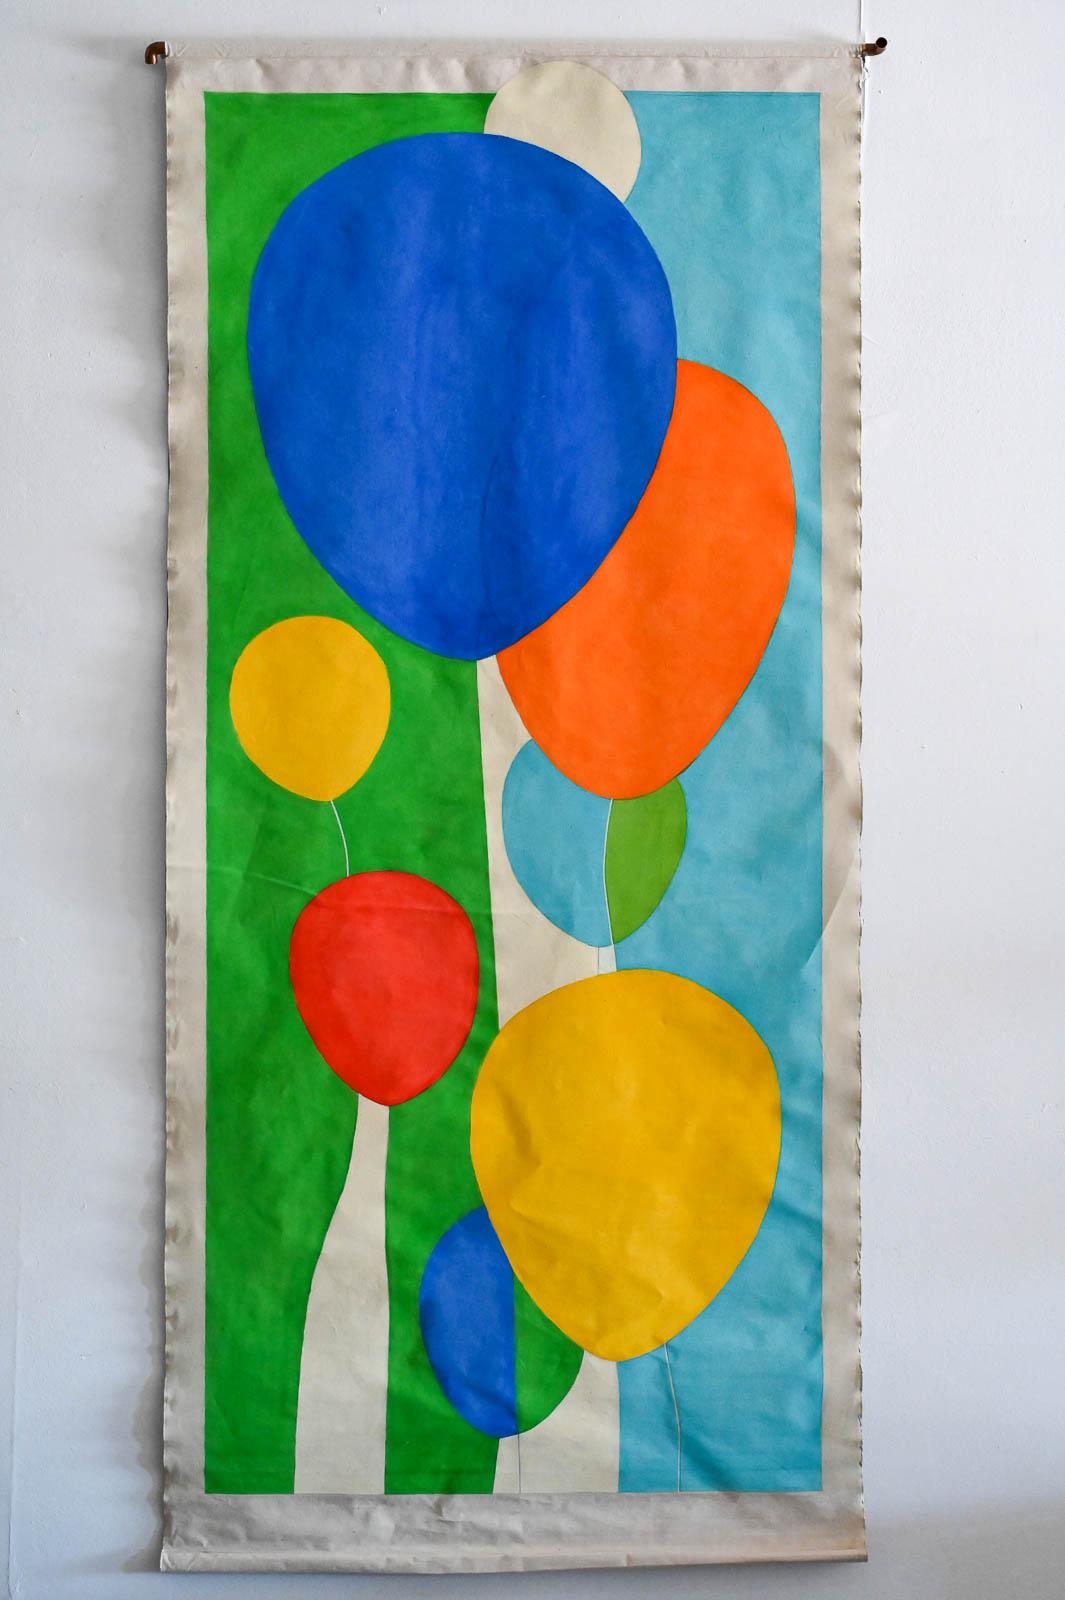 Painted canvas wall hanging by Arizona/California Artist Jean Klafs, 1984. Titled 